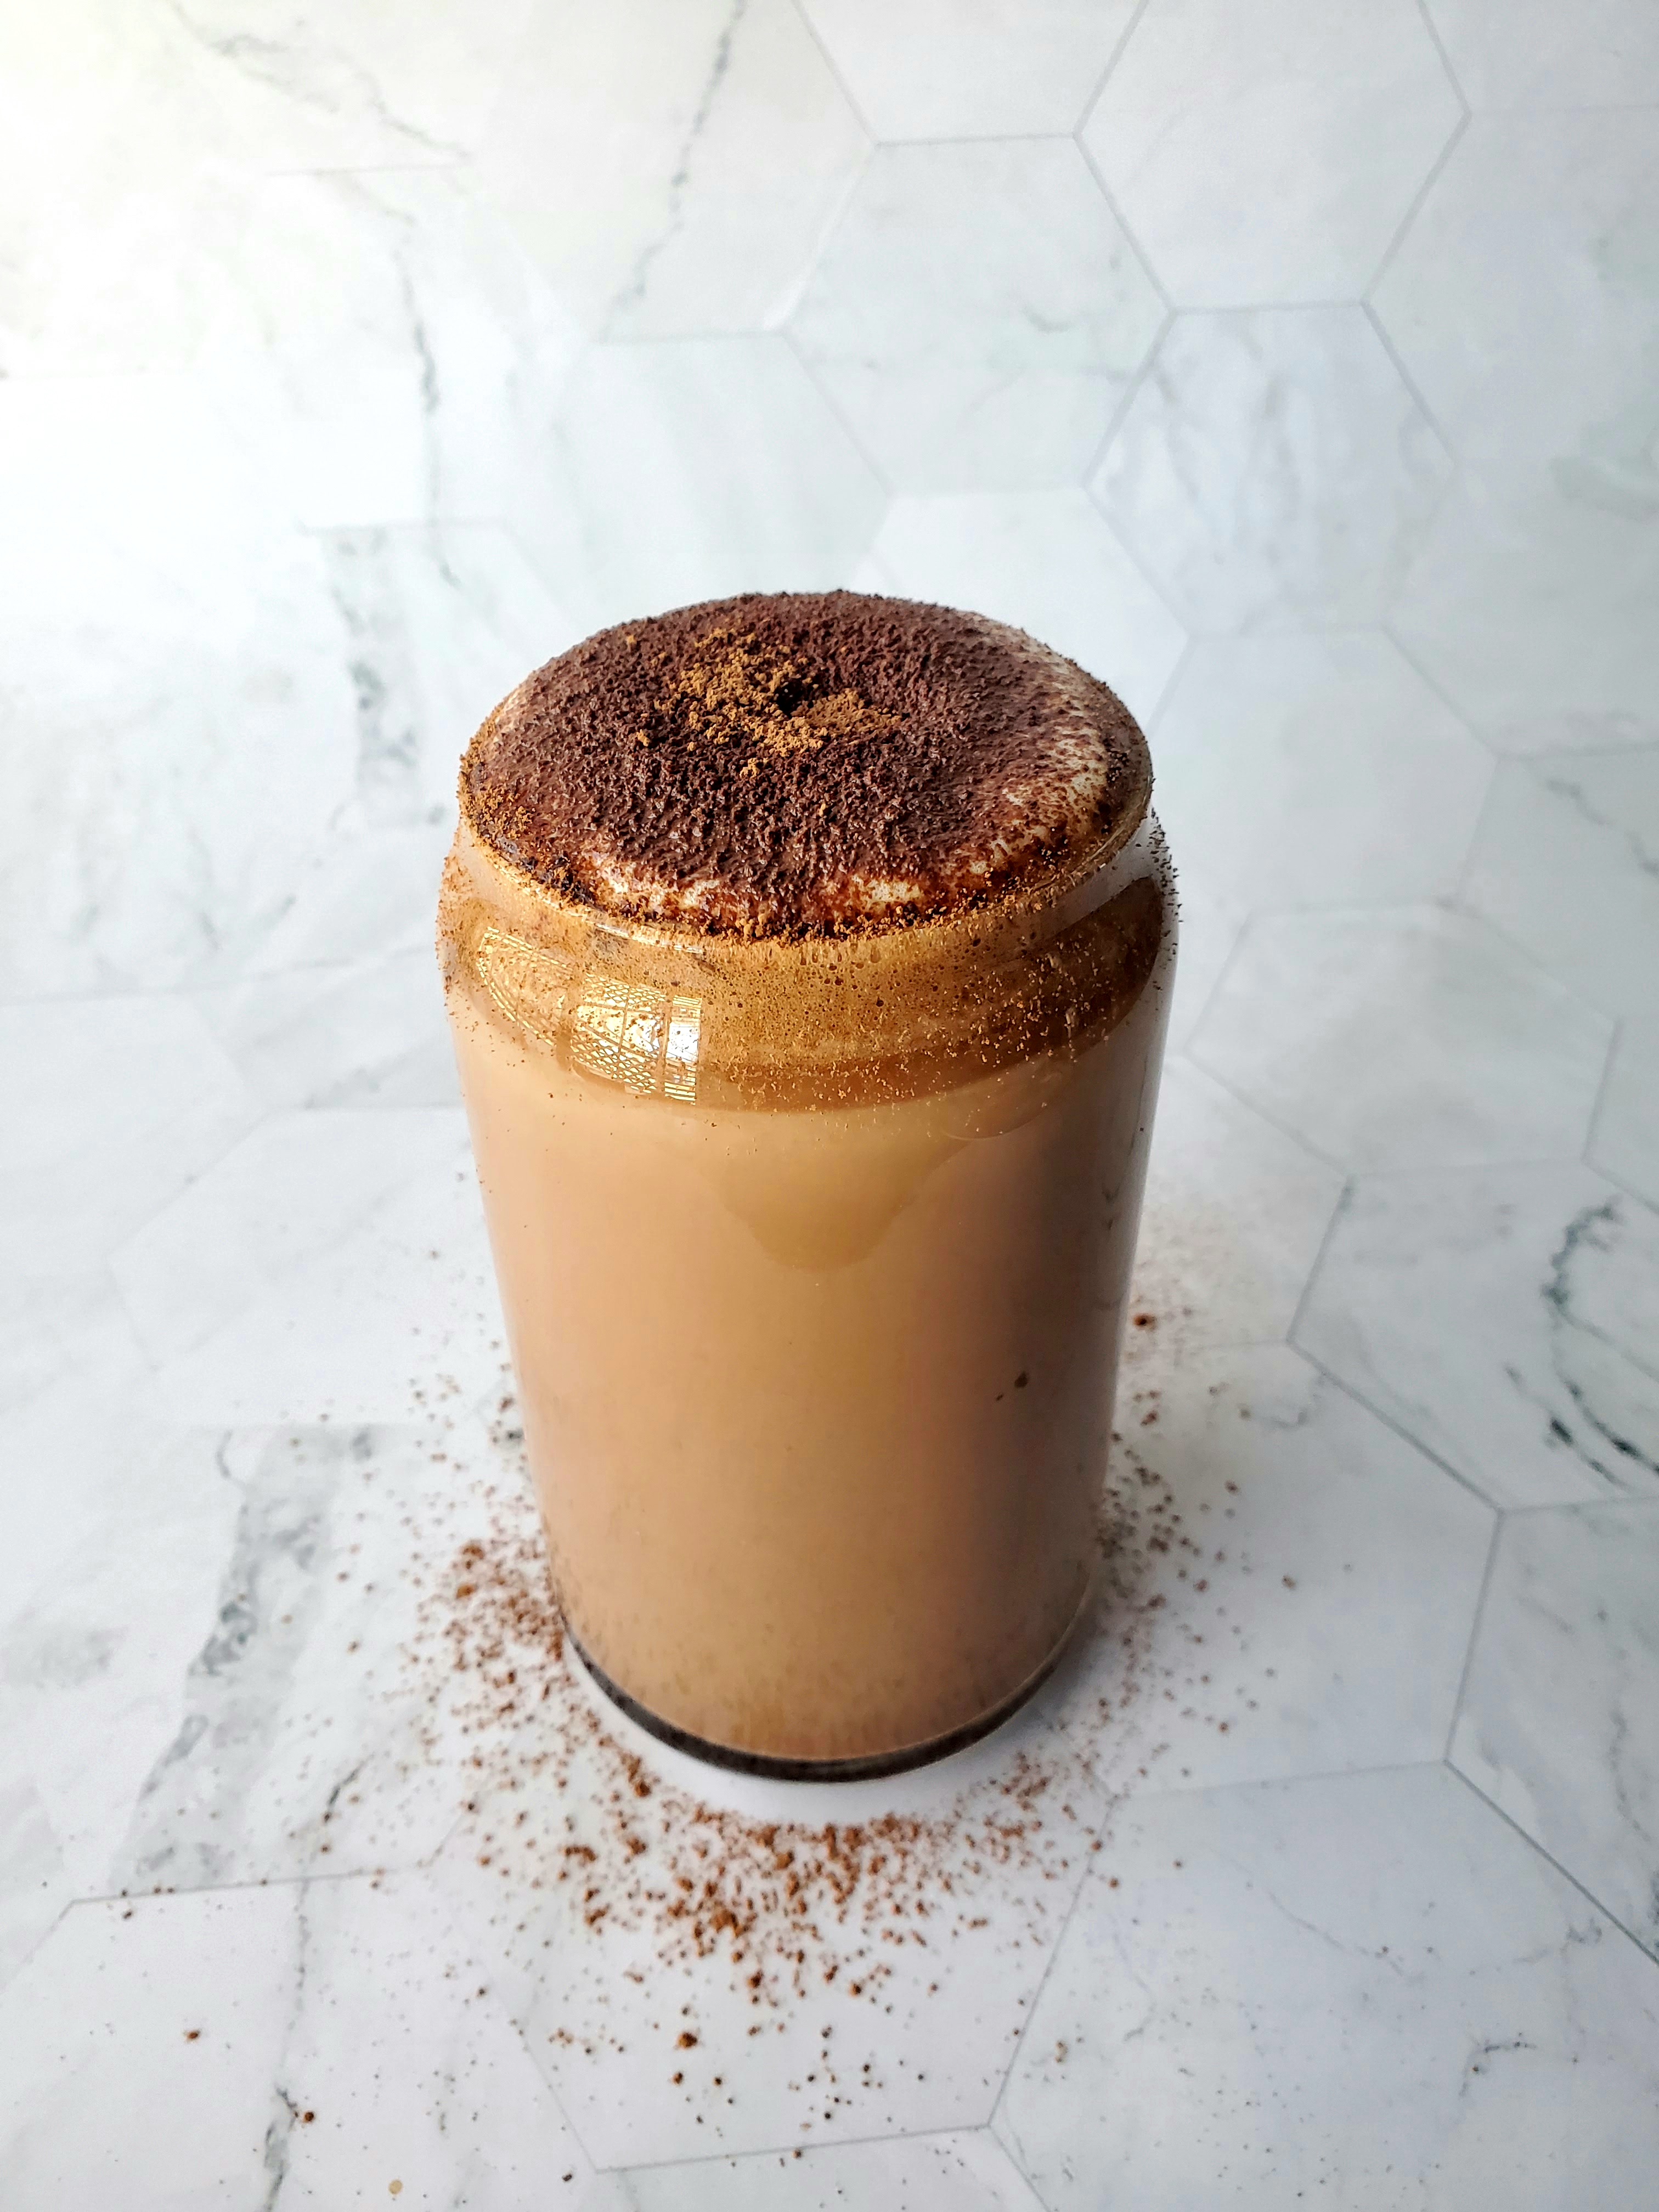 How To Make A Marocchino (What It Is + EASY 5 Step Recipe!)